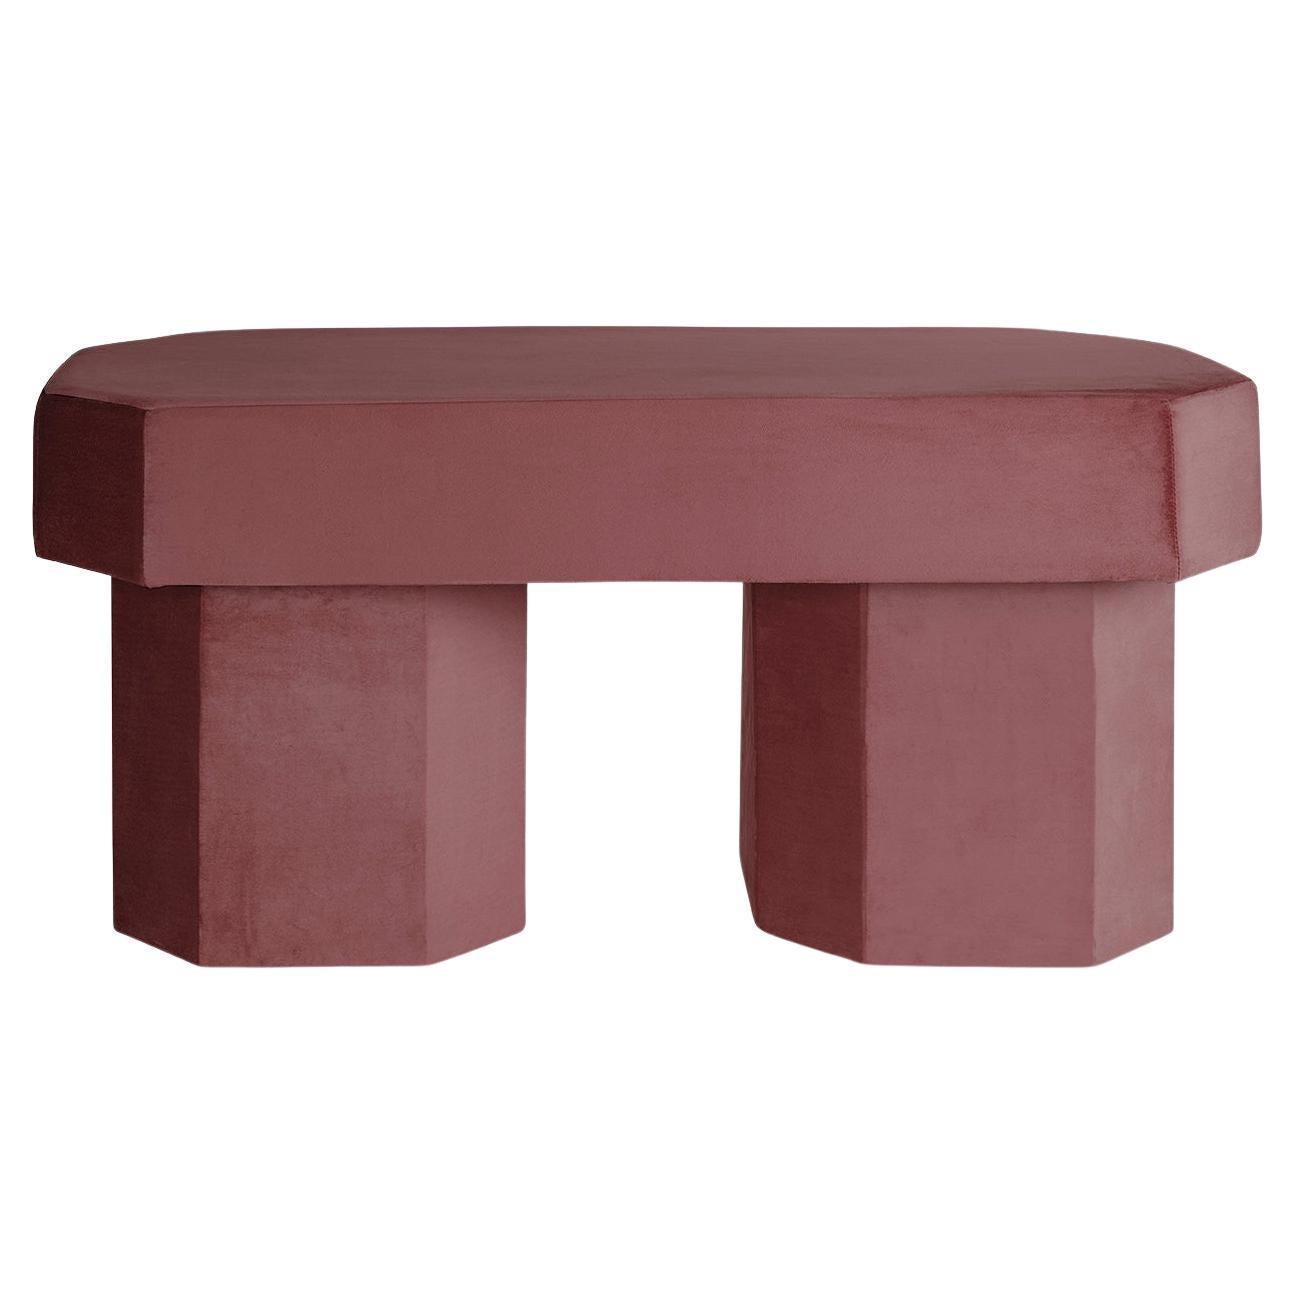 Viva Grana Bench by Houtique For Sale